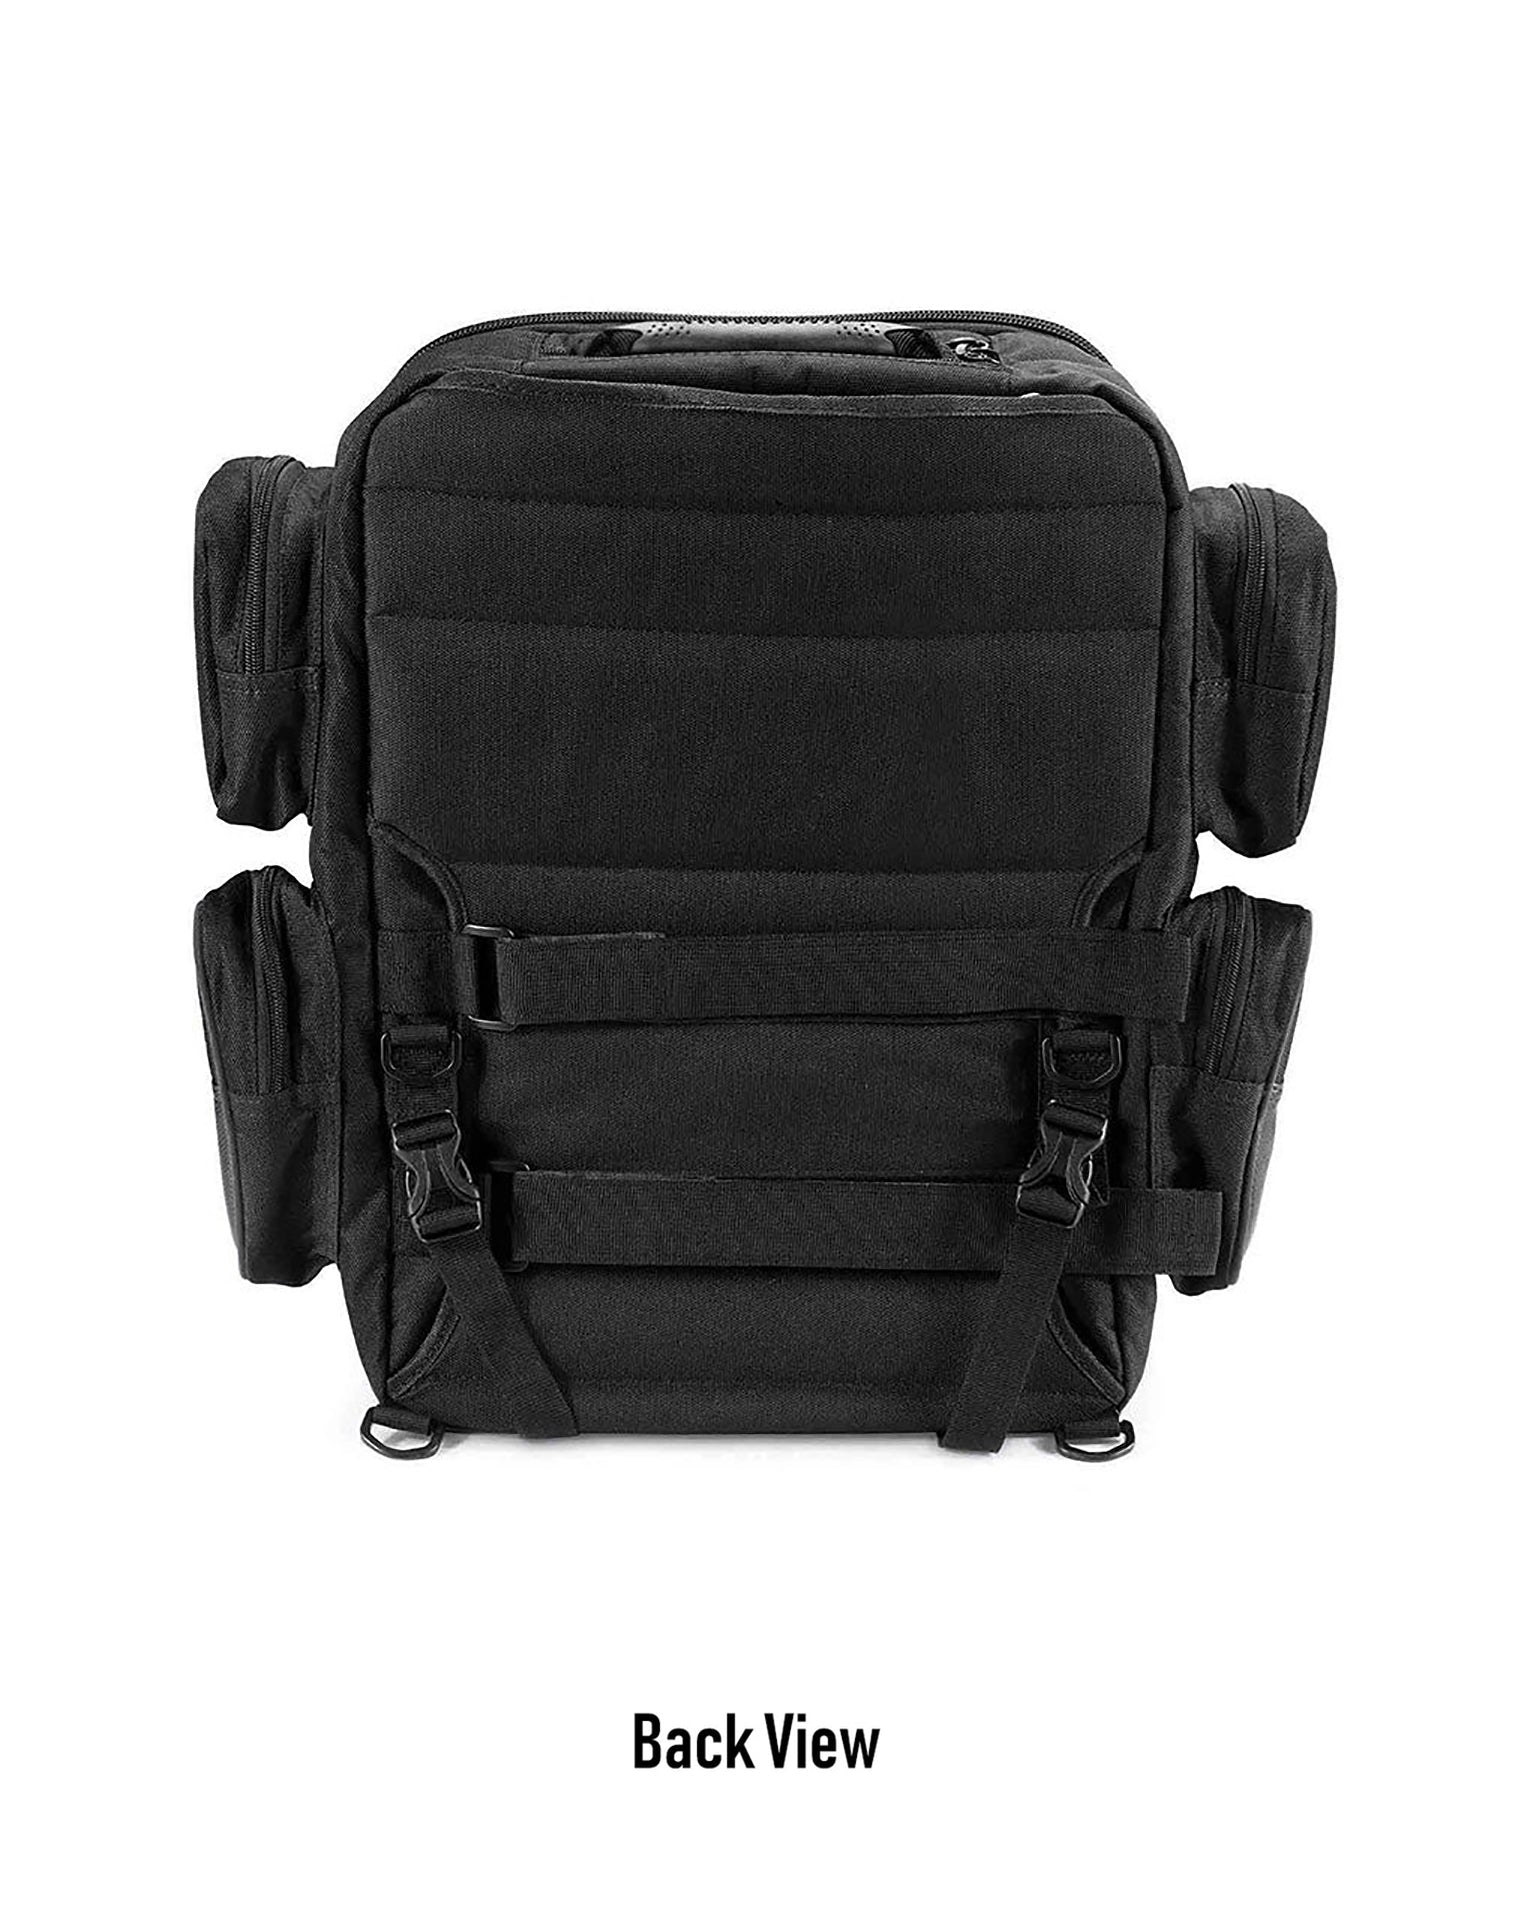 29L - Voyage Large Triumph Motorcycle Backpack